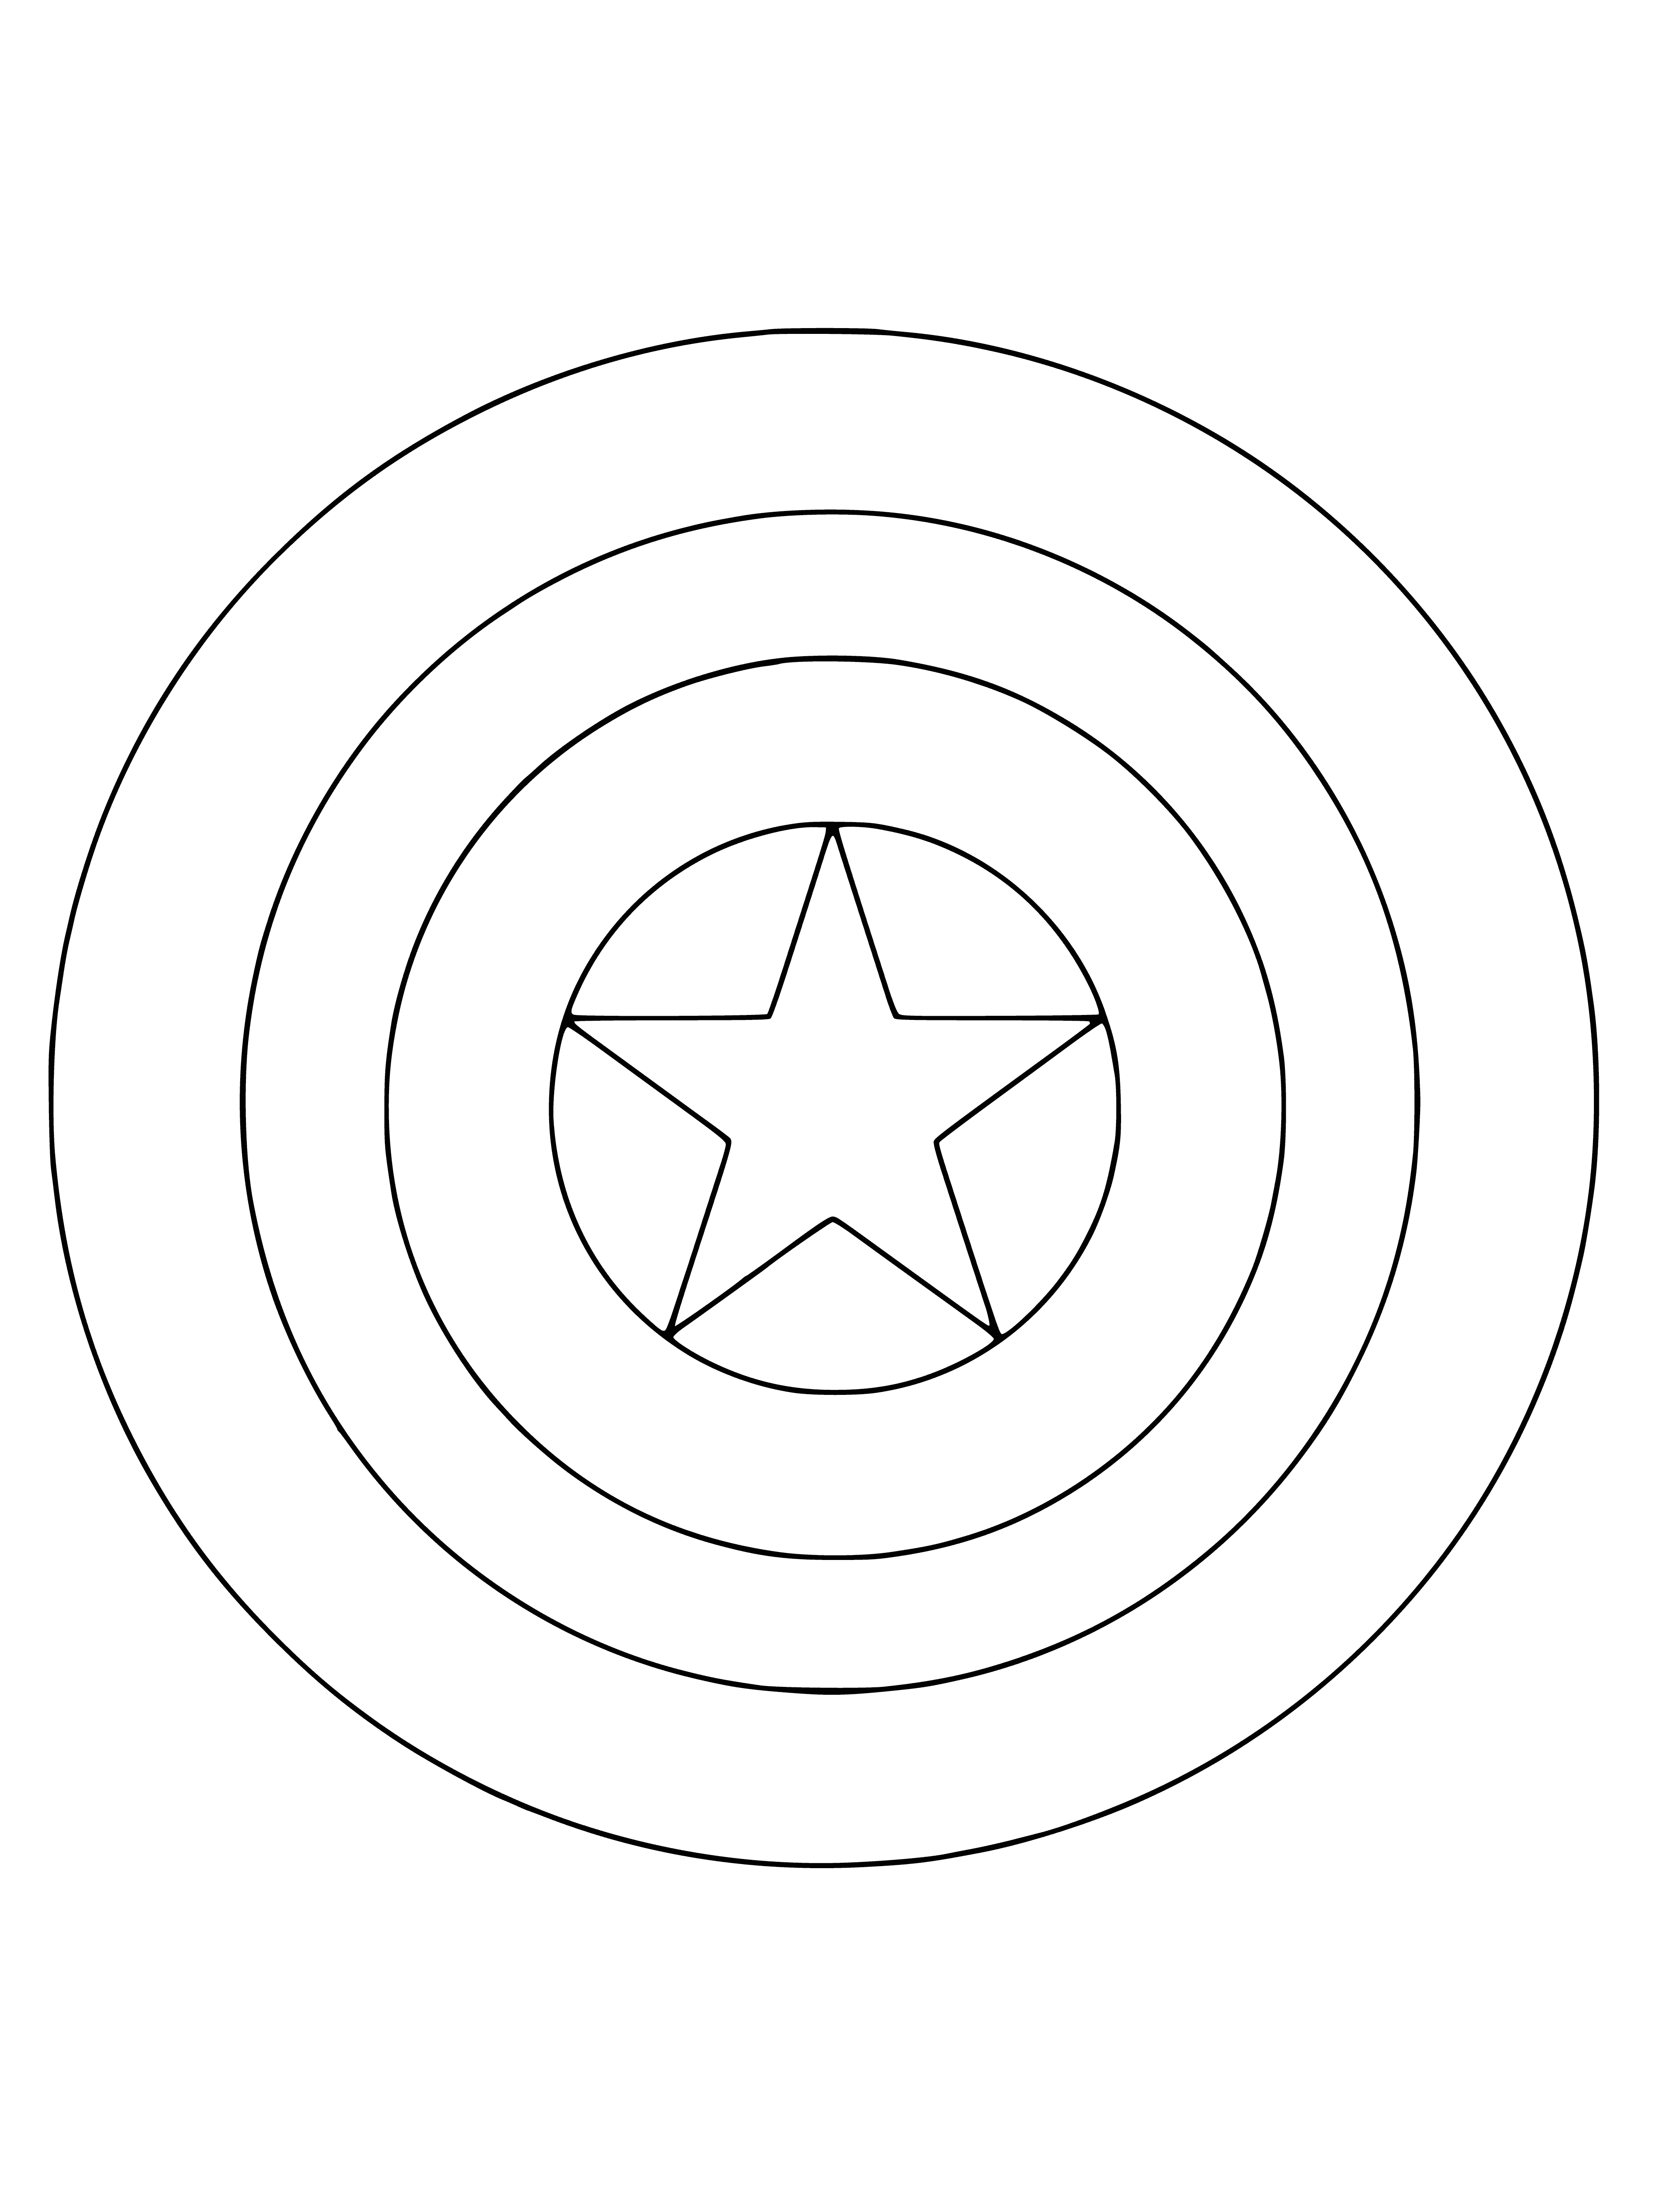 Captain America's Shield coloring page